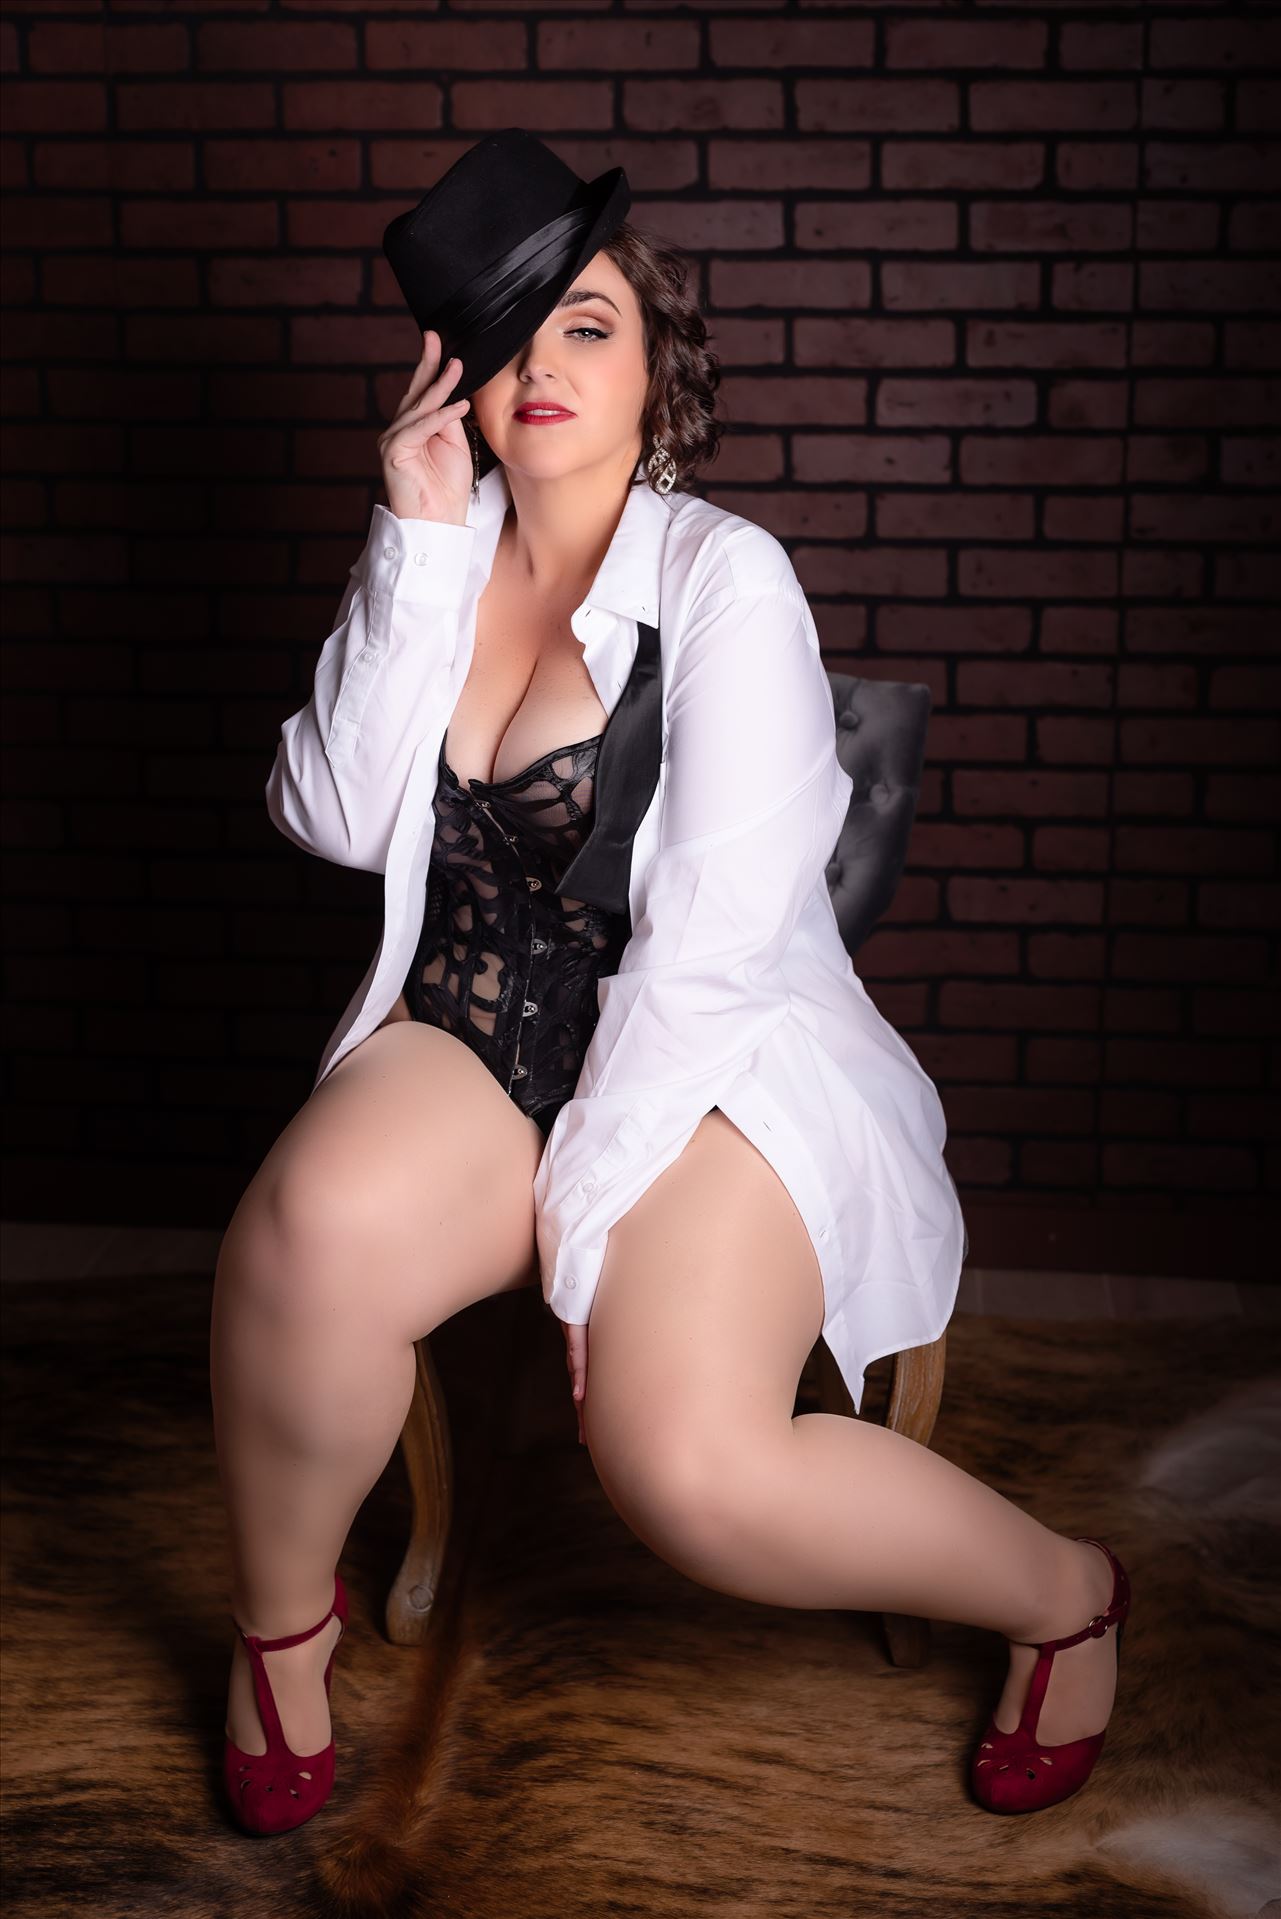 Album-4044.JPG Beachfront Boudoir by Mirror's Edge Photography is a Boutique Luxury Boudoir Photography Studio located just blocks from the beach in Oceano, California. My mission is to show as many women as possible how beautiful they truly are! by Sarah Williams